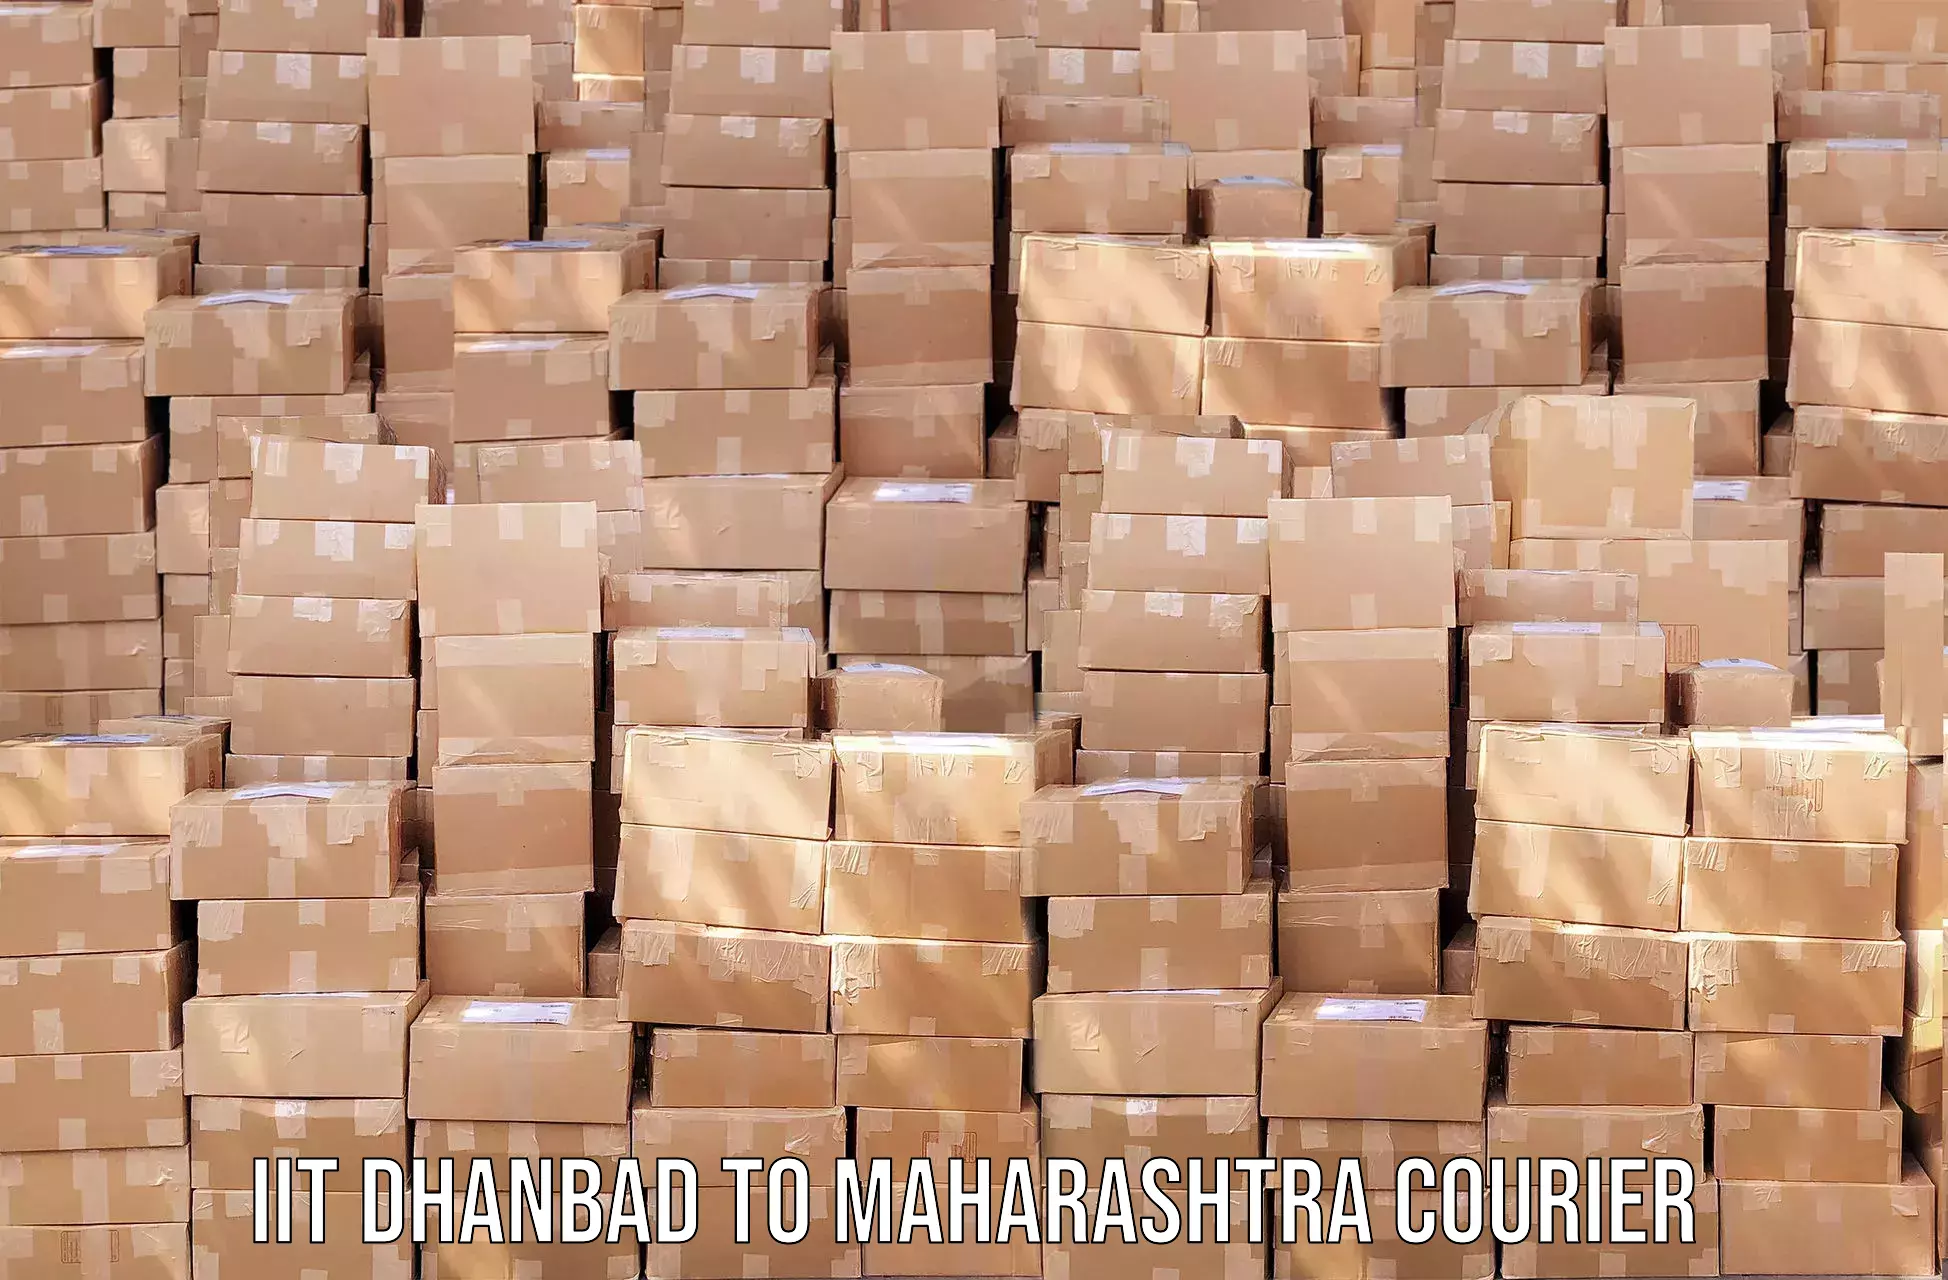 Ocean freight courier IIT Dhanbad to Chalisgaon